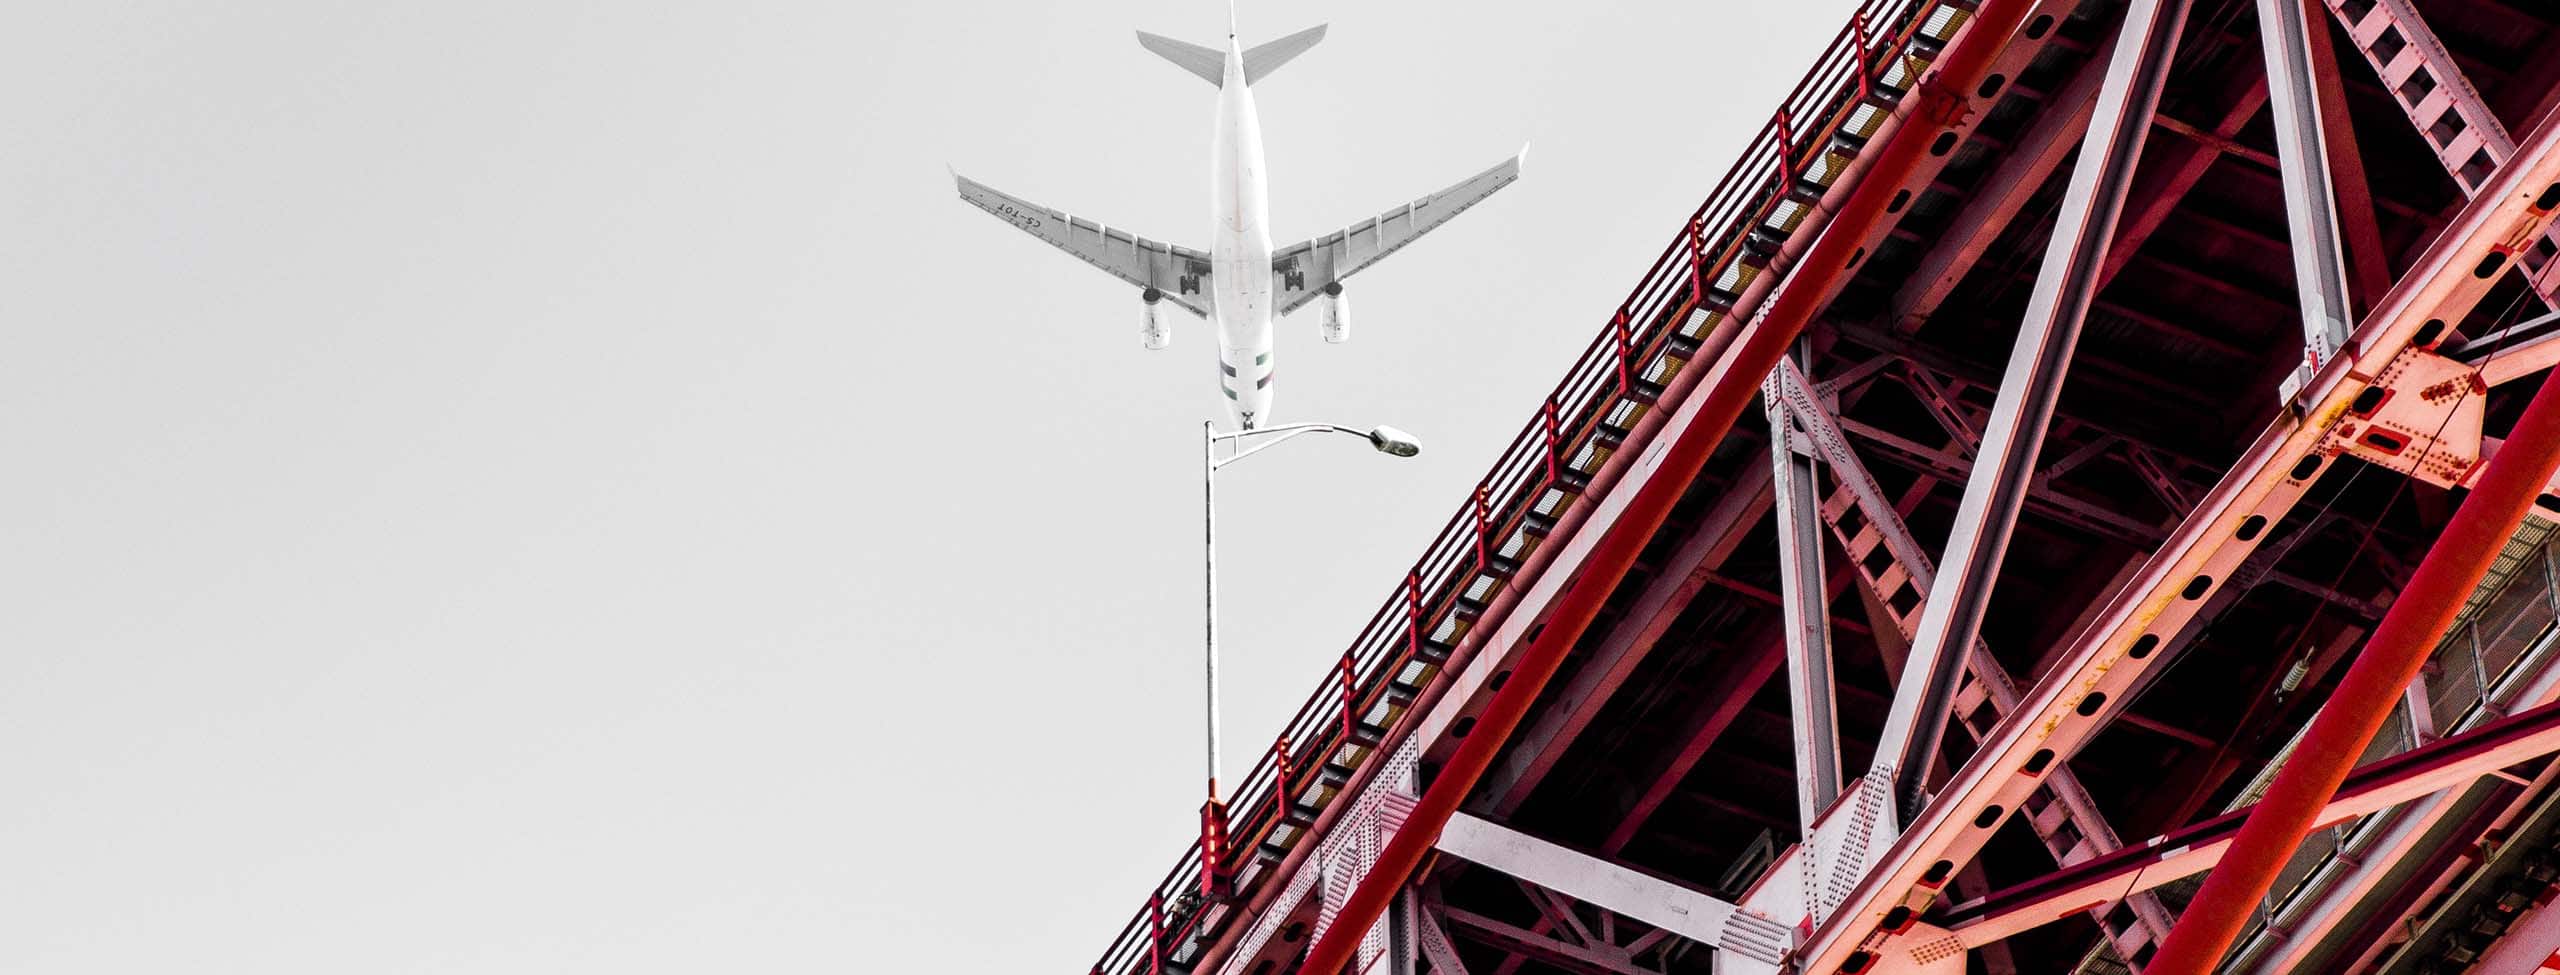 airplane flying over a red bridge